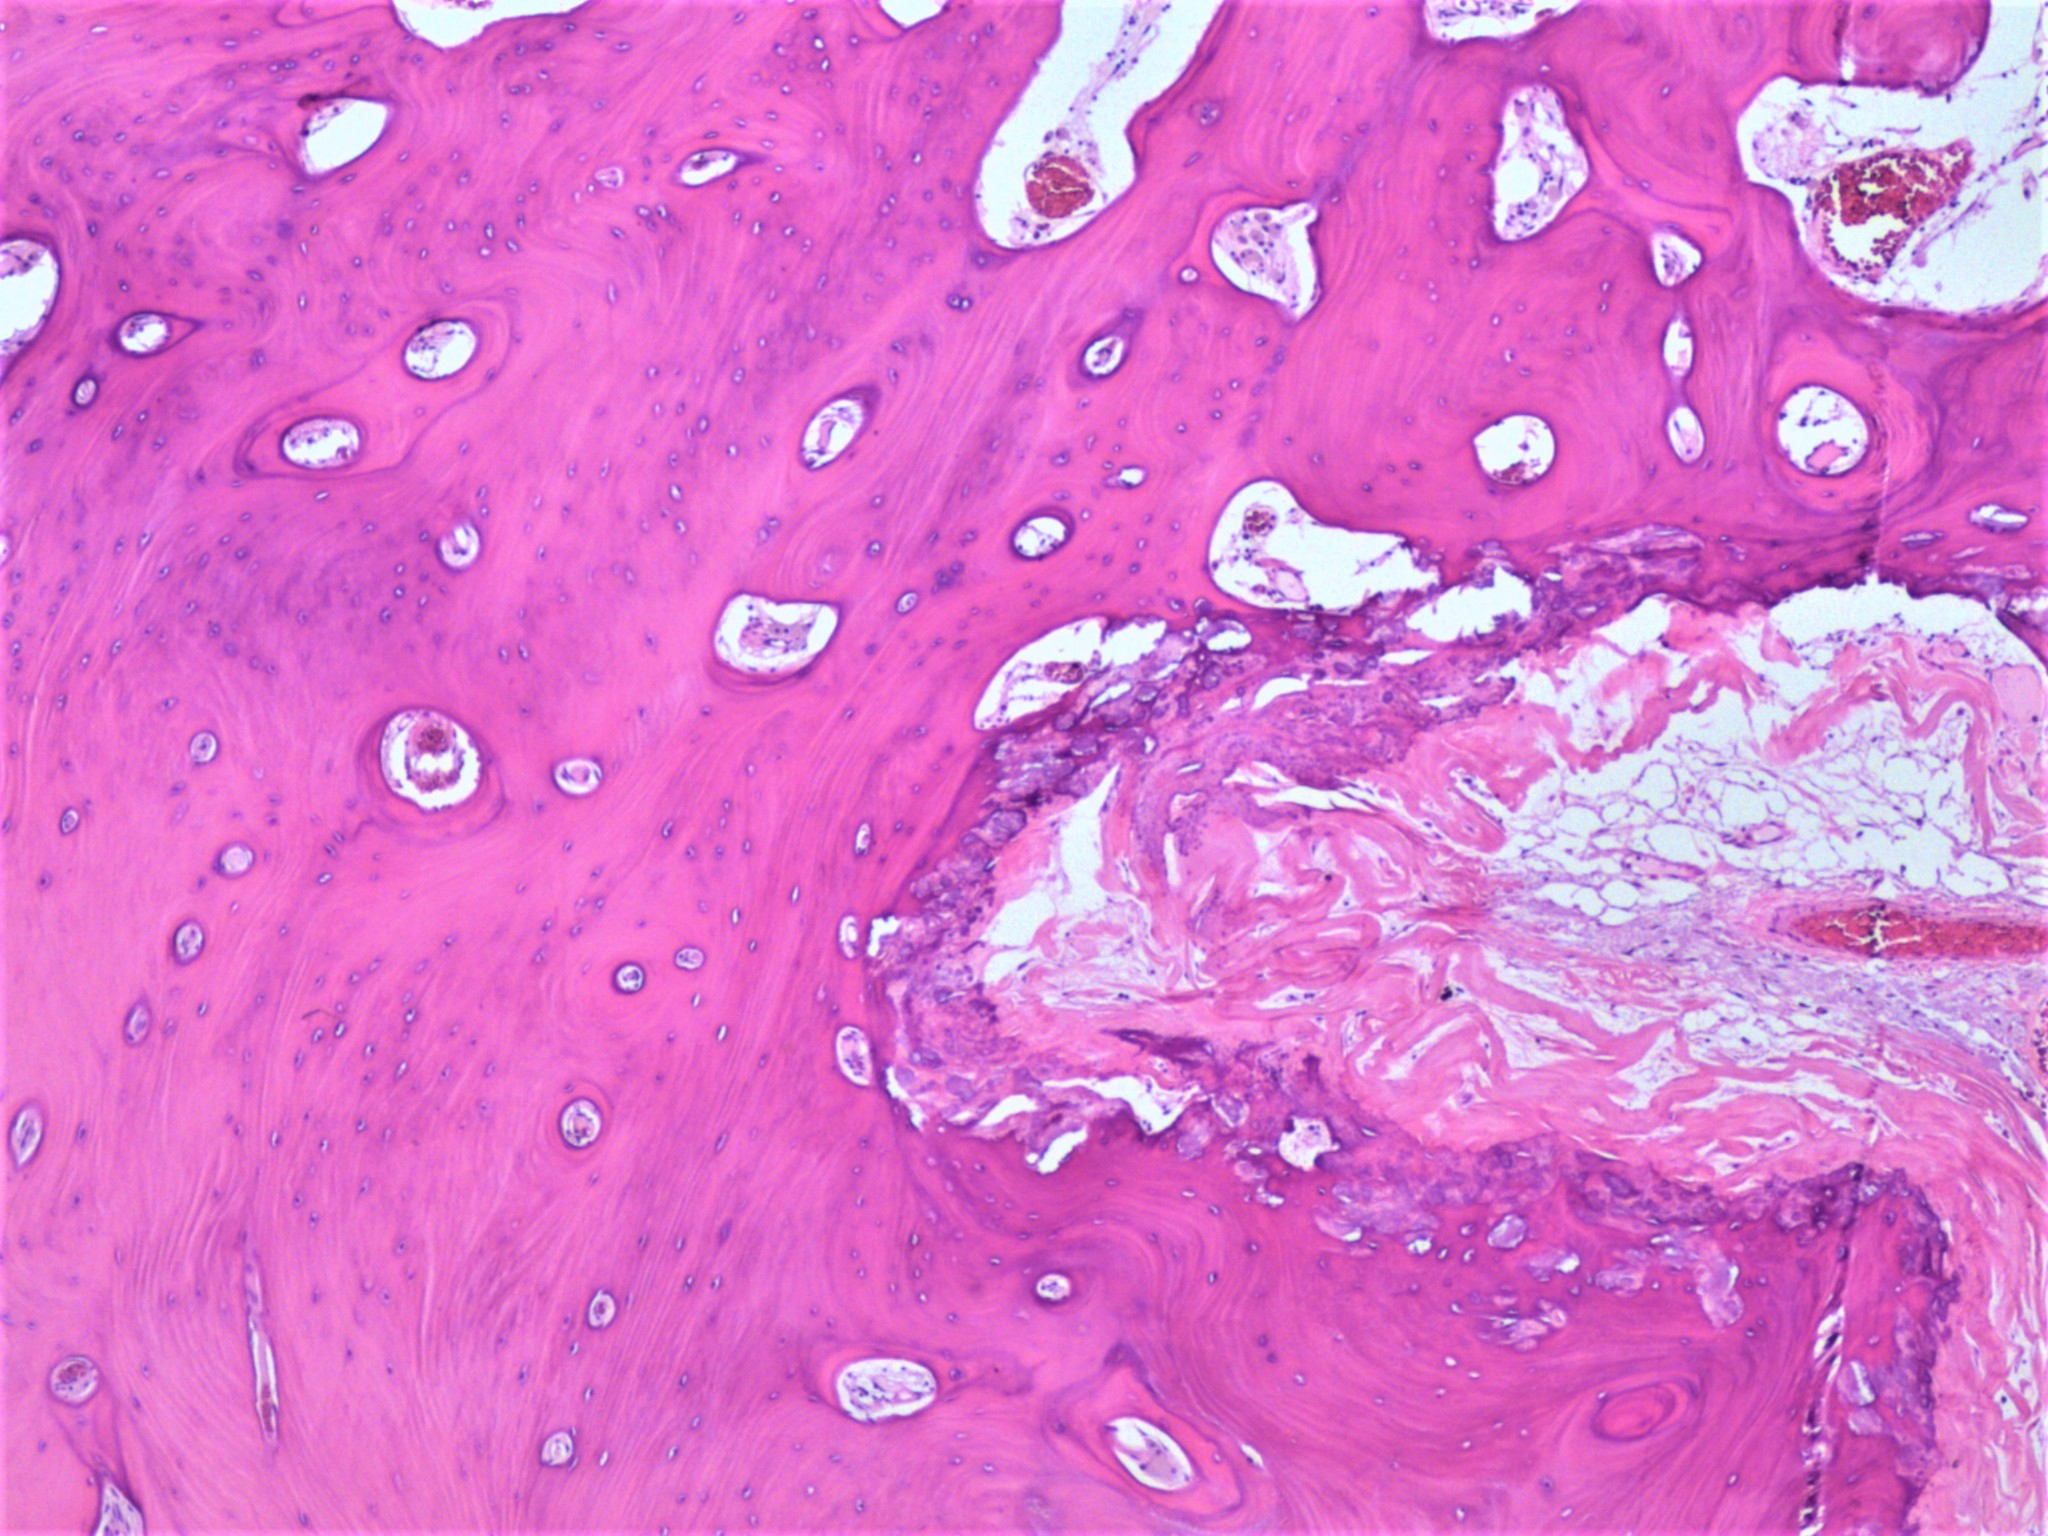 Osseous metaplasia of the ovary